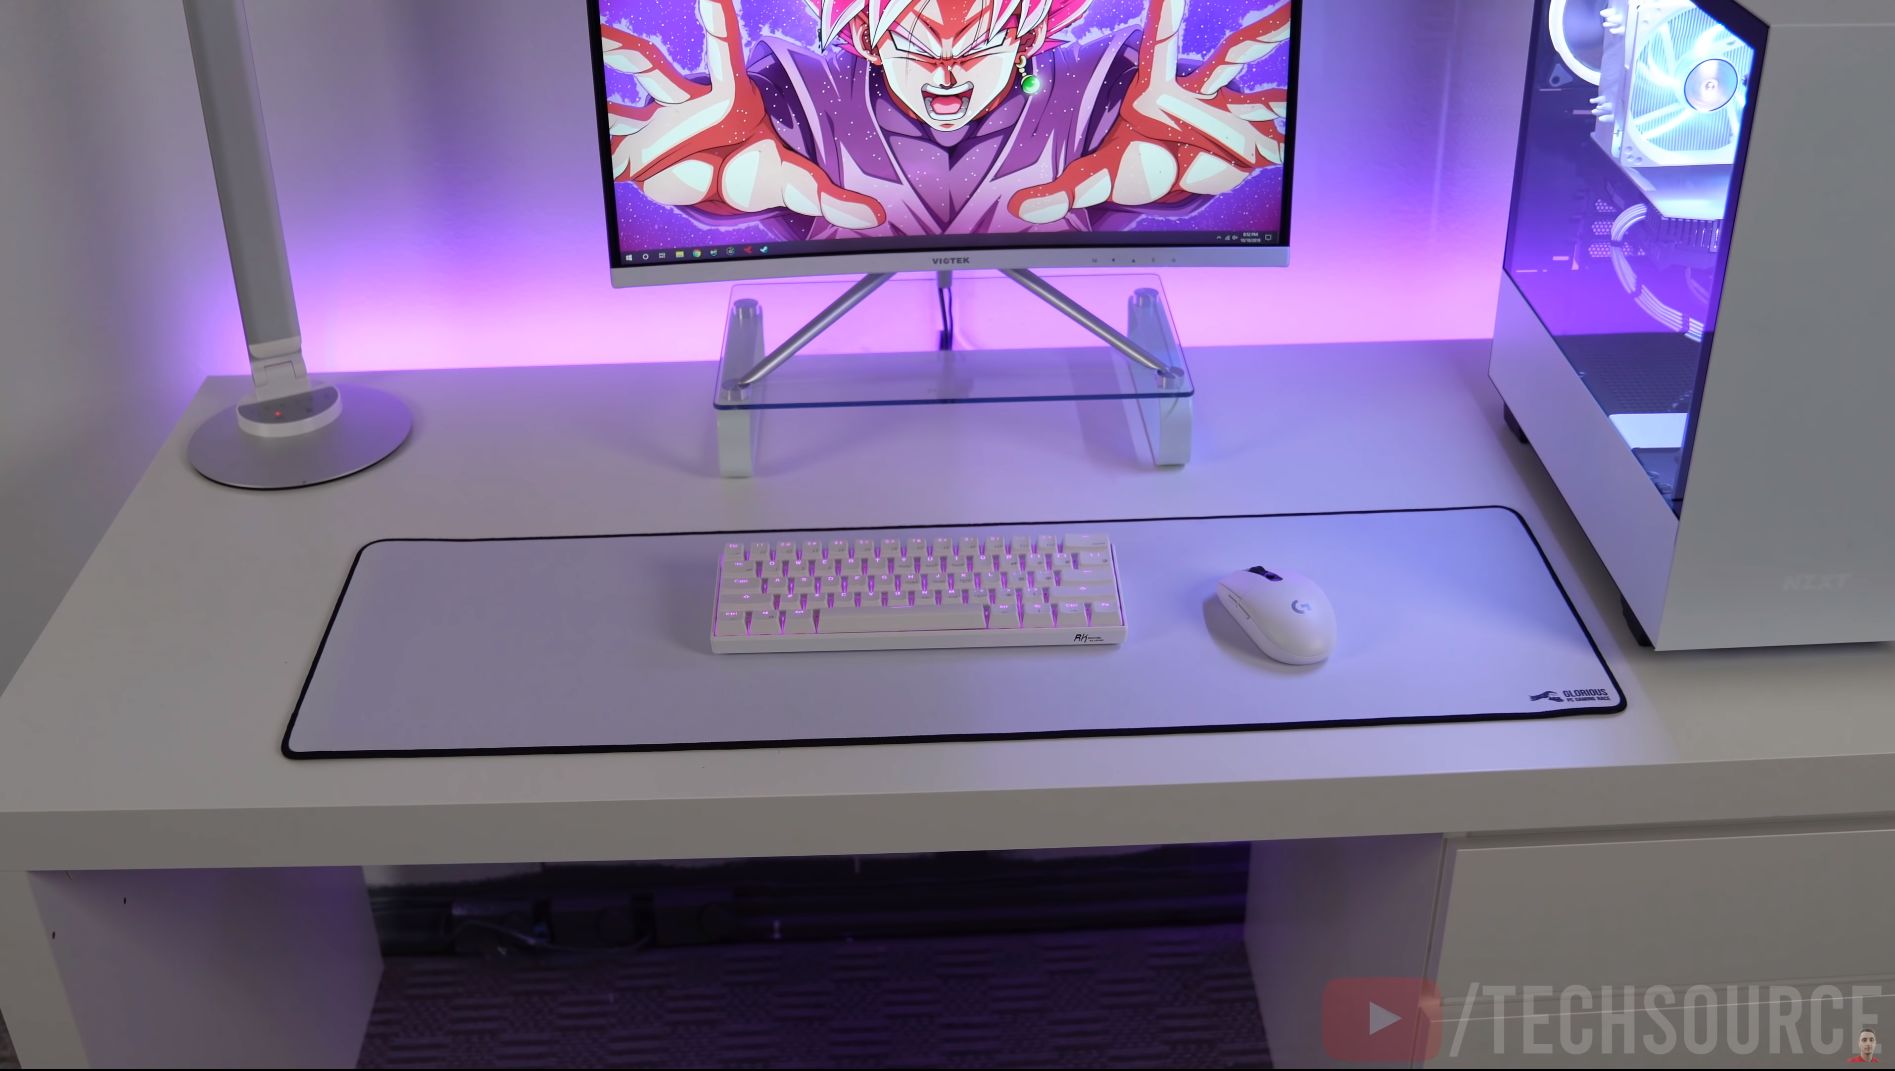 Edgaroganesyan S Setup Minimalistic Gaming Setup Scooget Learn how to use a camera as a cameras, even those in phones, brag about megapixels and lens specifications — but. minimalistic gaming setup